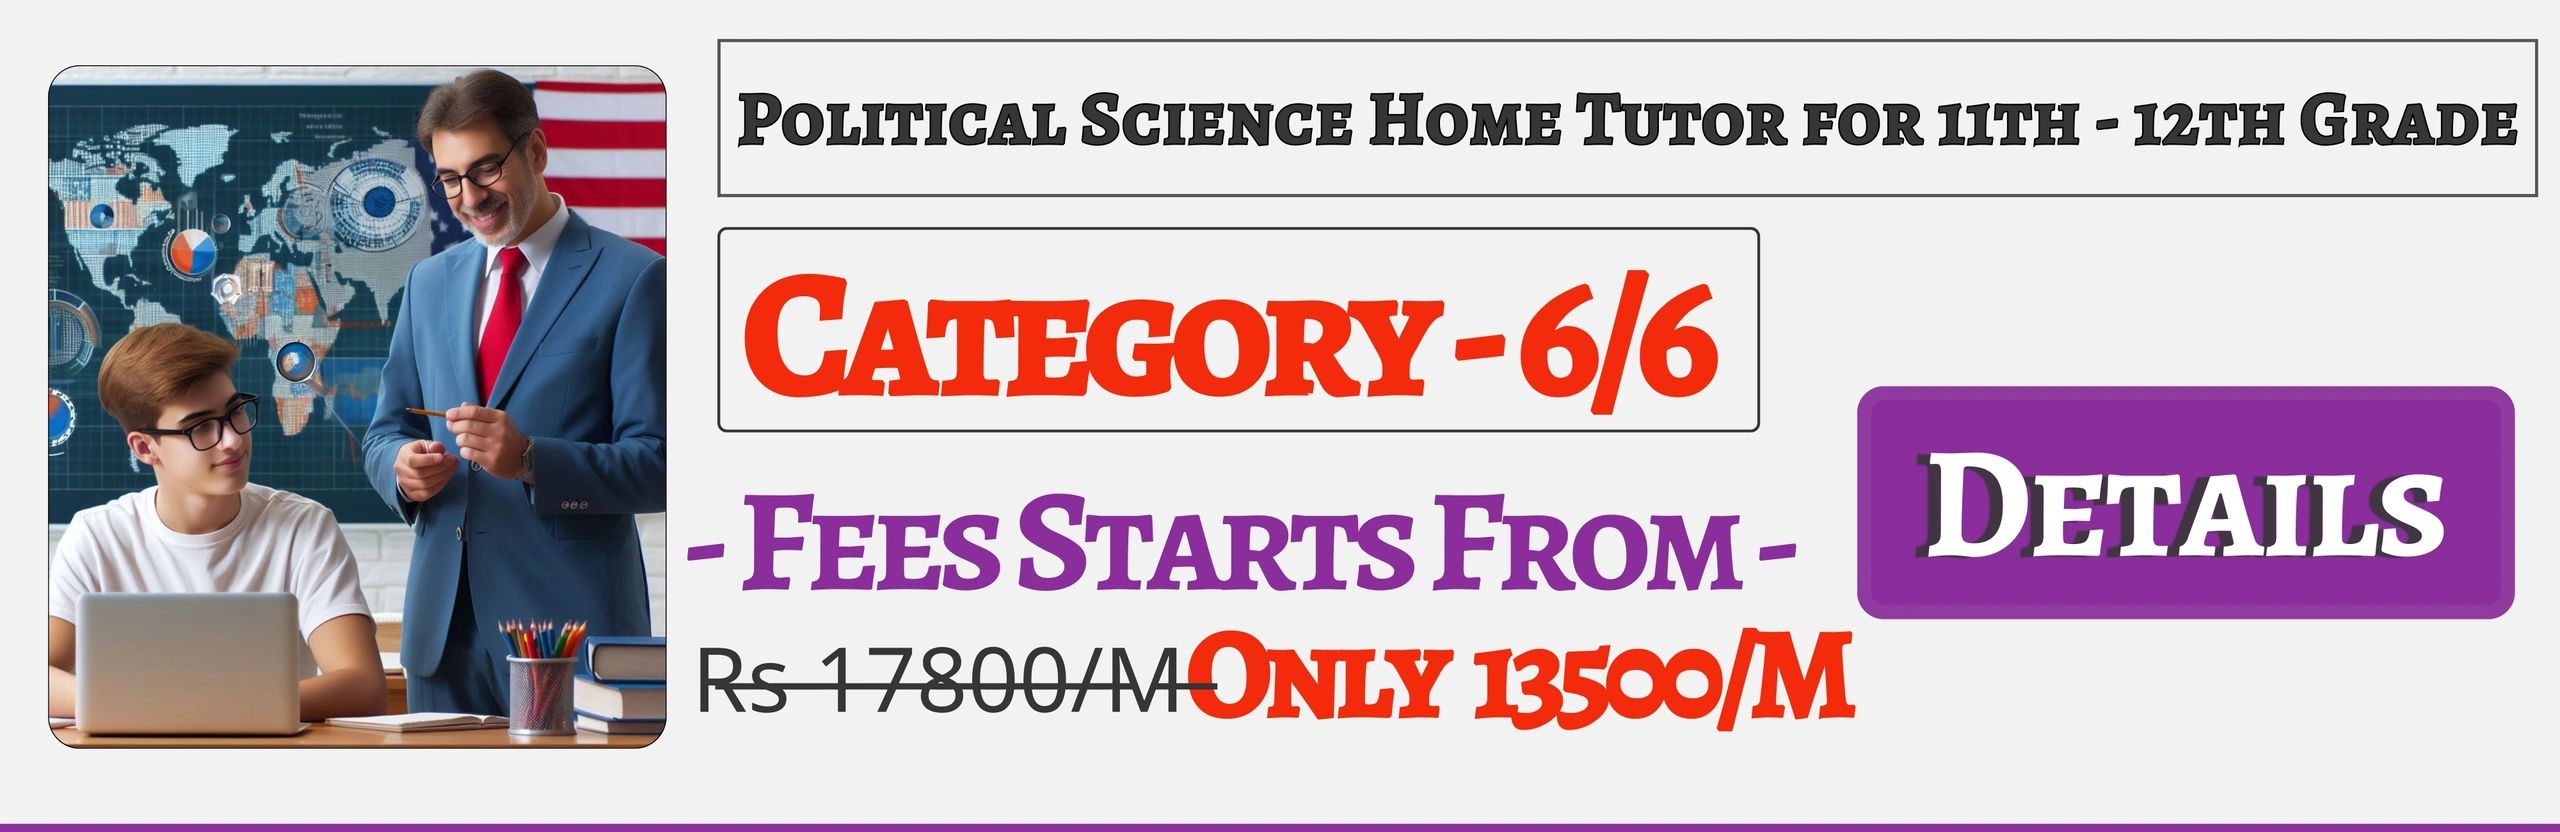 Book Best Nearby Political Science Home Tuition Tutors For 11th & 12th In Jaipur , Fees Only 13500/M